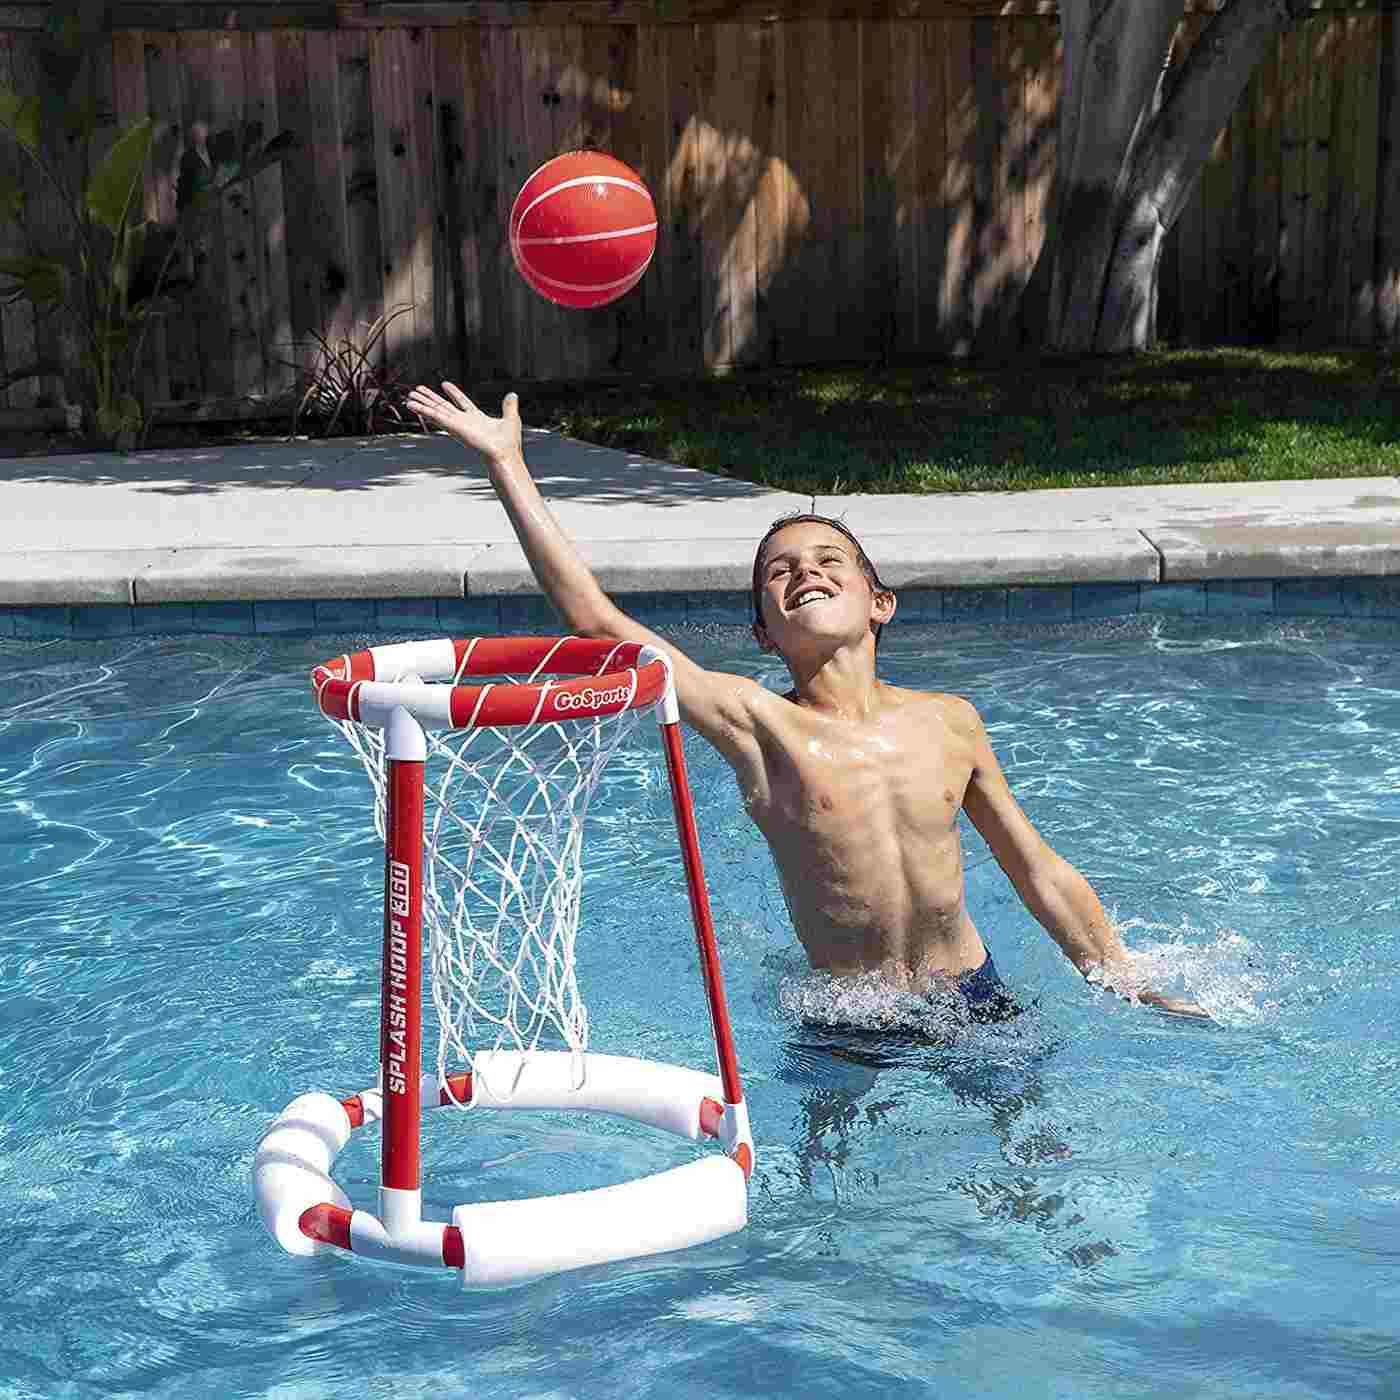 Basketball as Pool Games for Genuine Plays on the Party